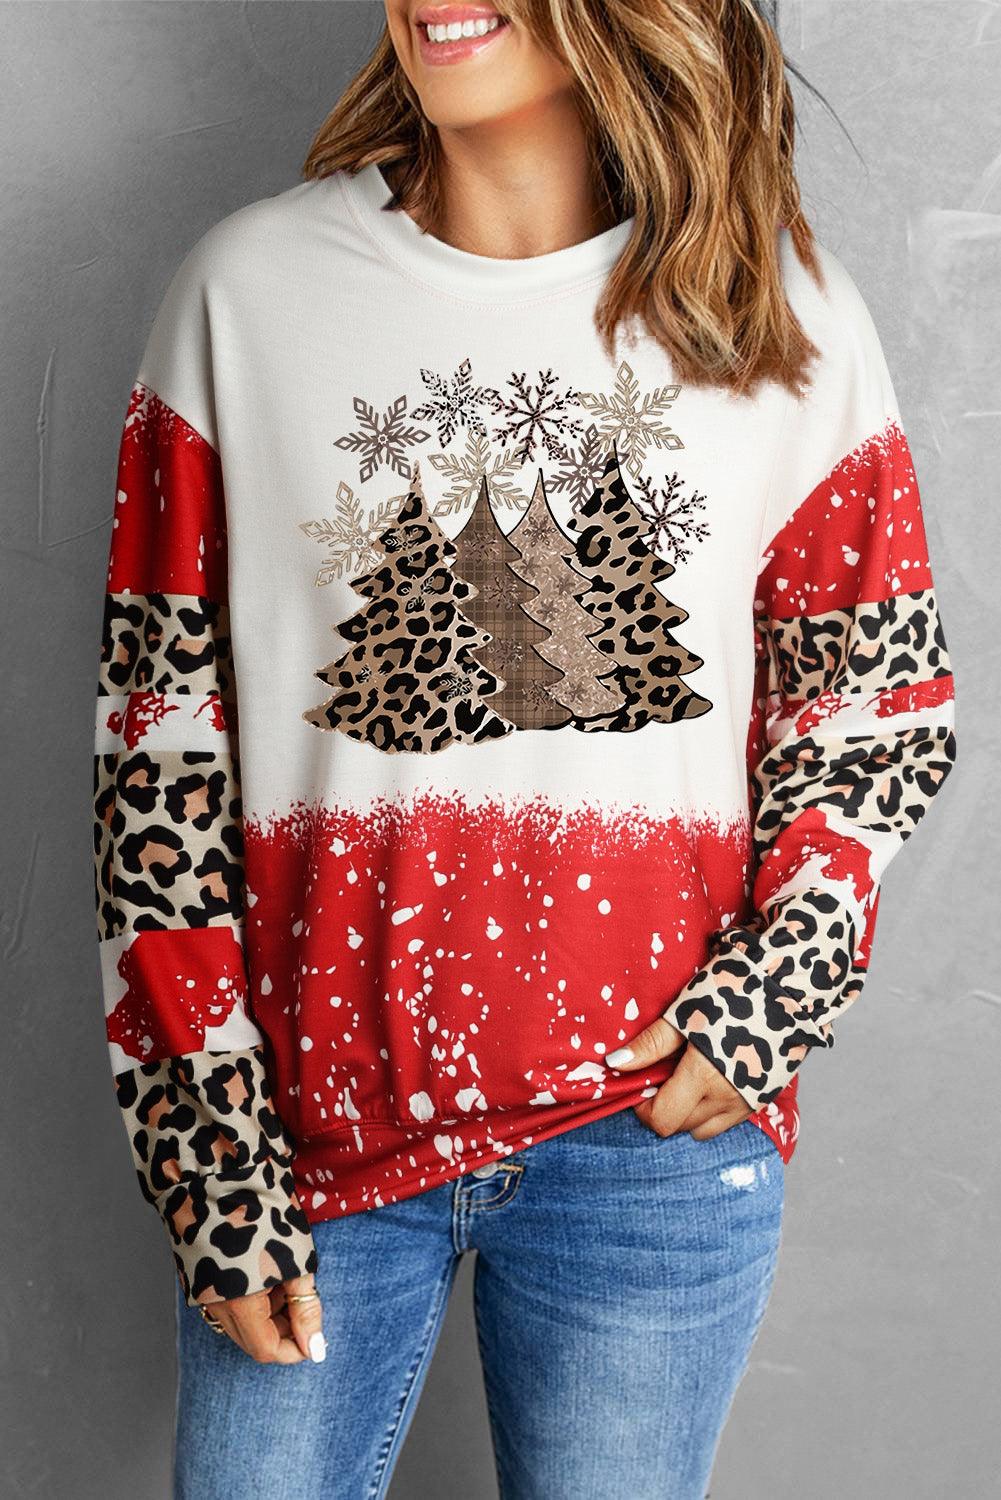 Red Tie Dye Leopard Christmas Tree Graphic Top - L & M Kee, LLC